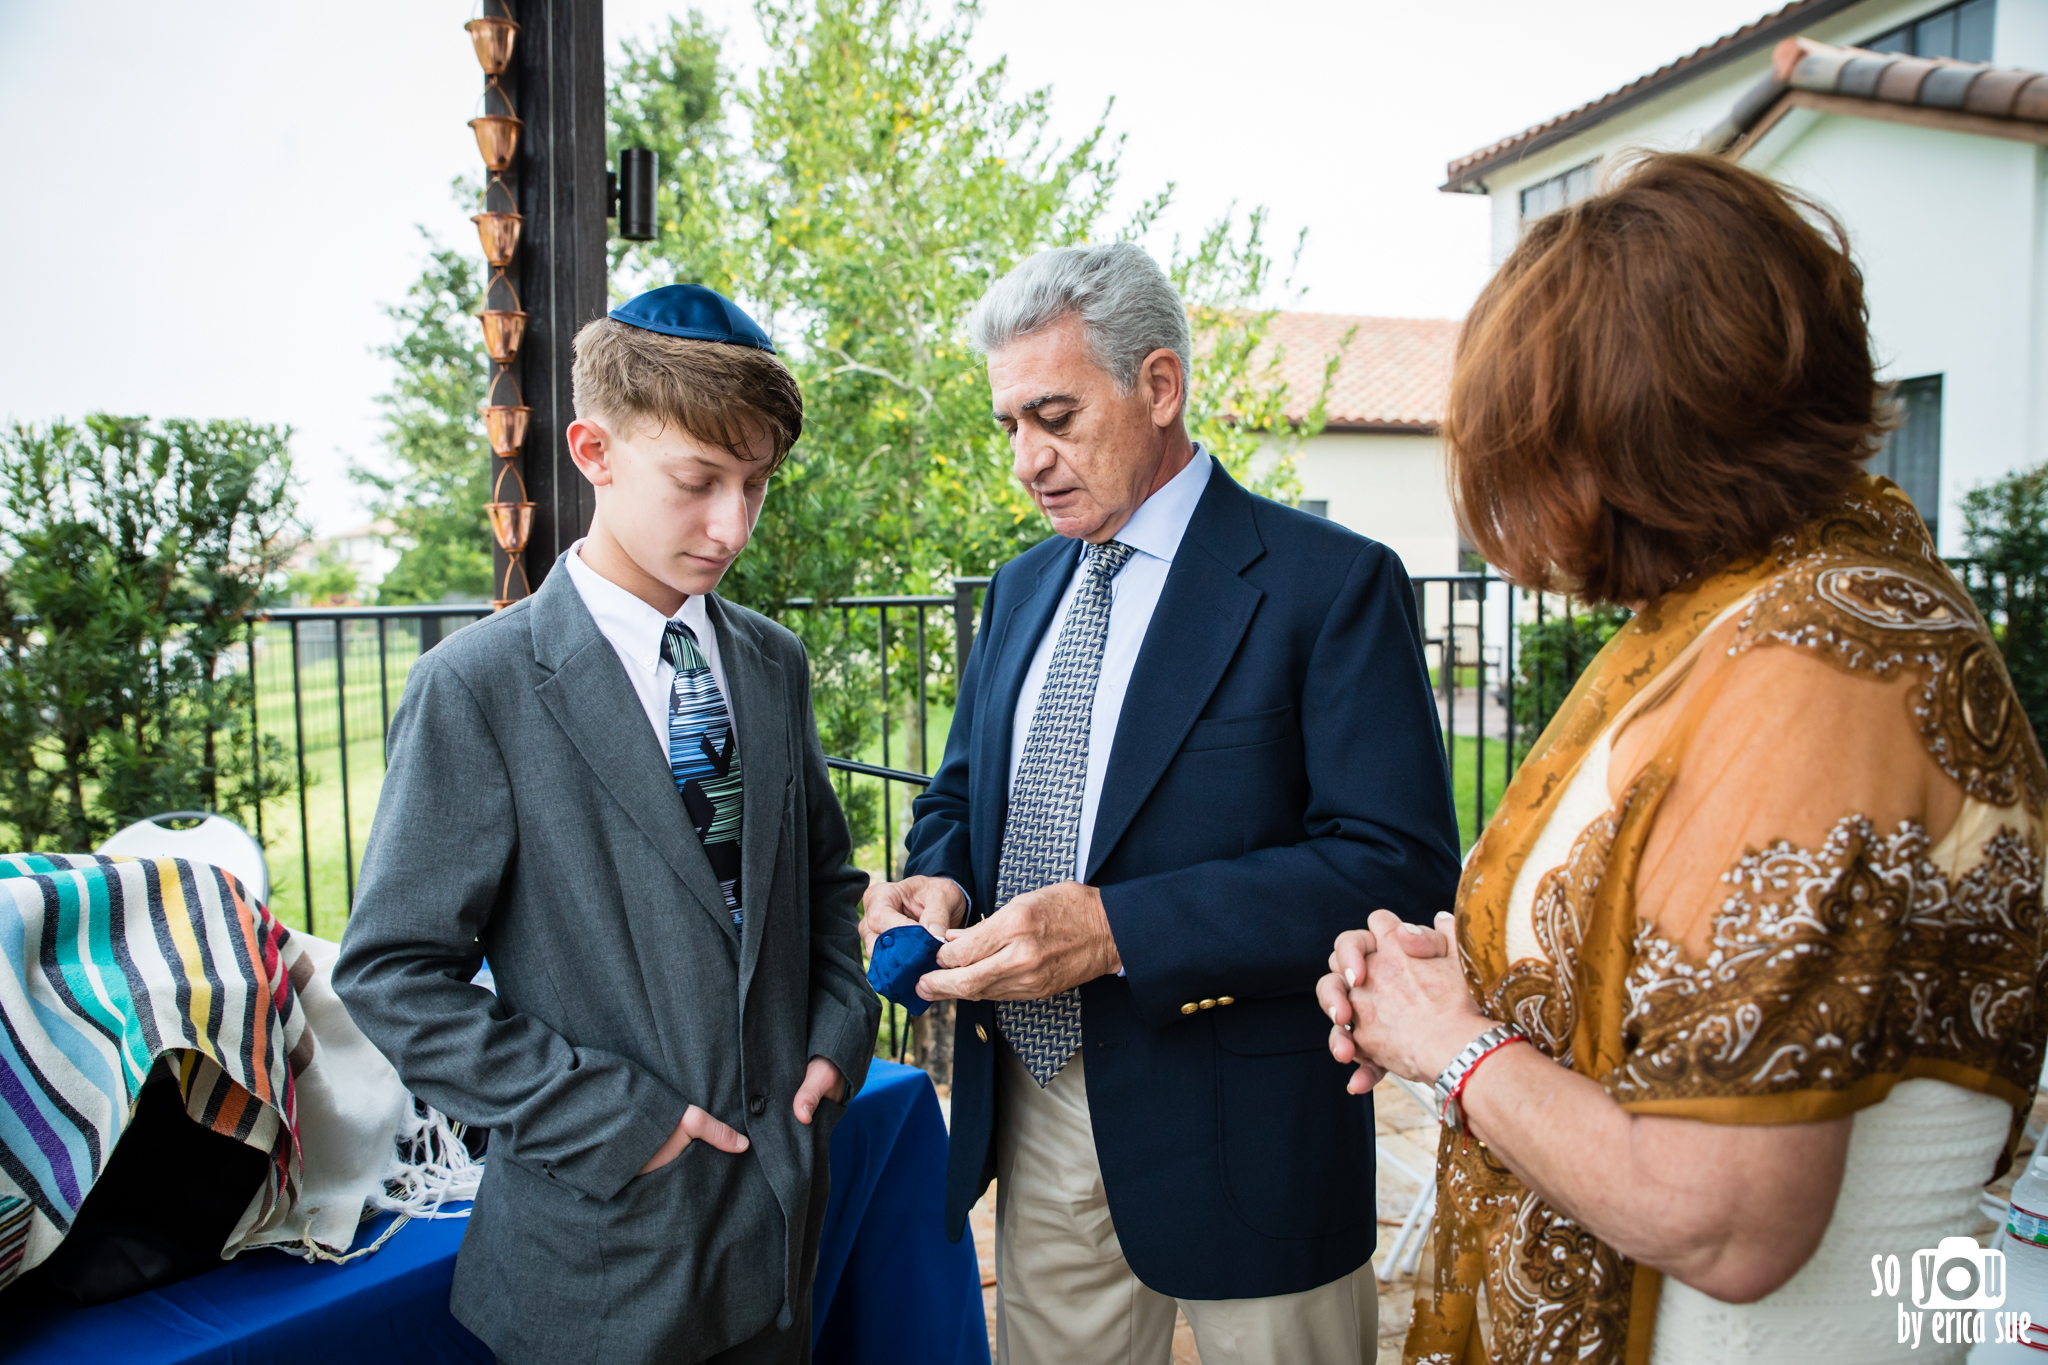 bar-mitzvah-photography-ft-lauderdale-so-you-by-erica-sue-7658.jpg